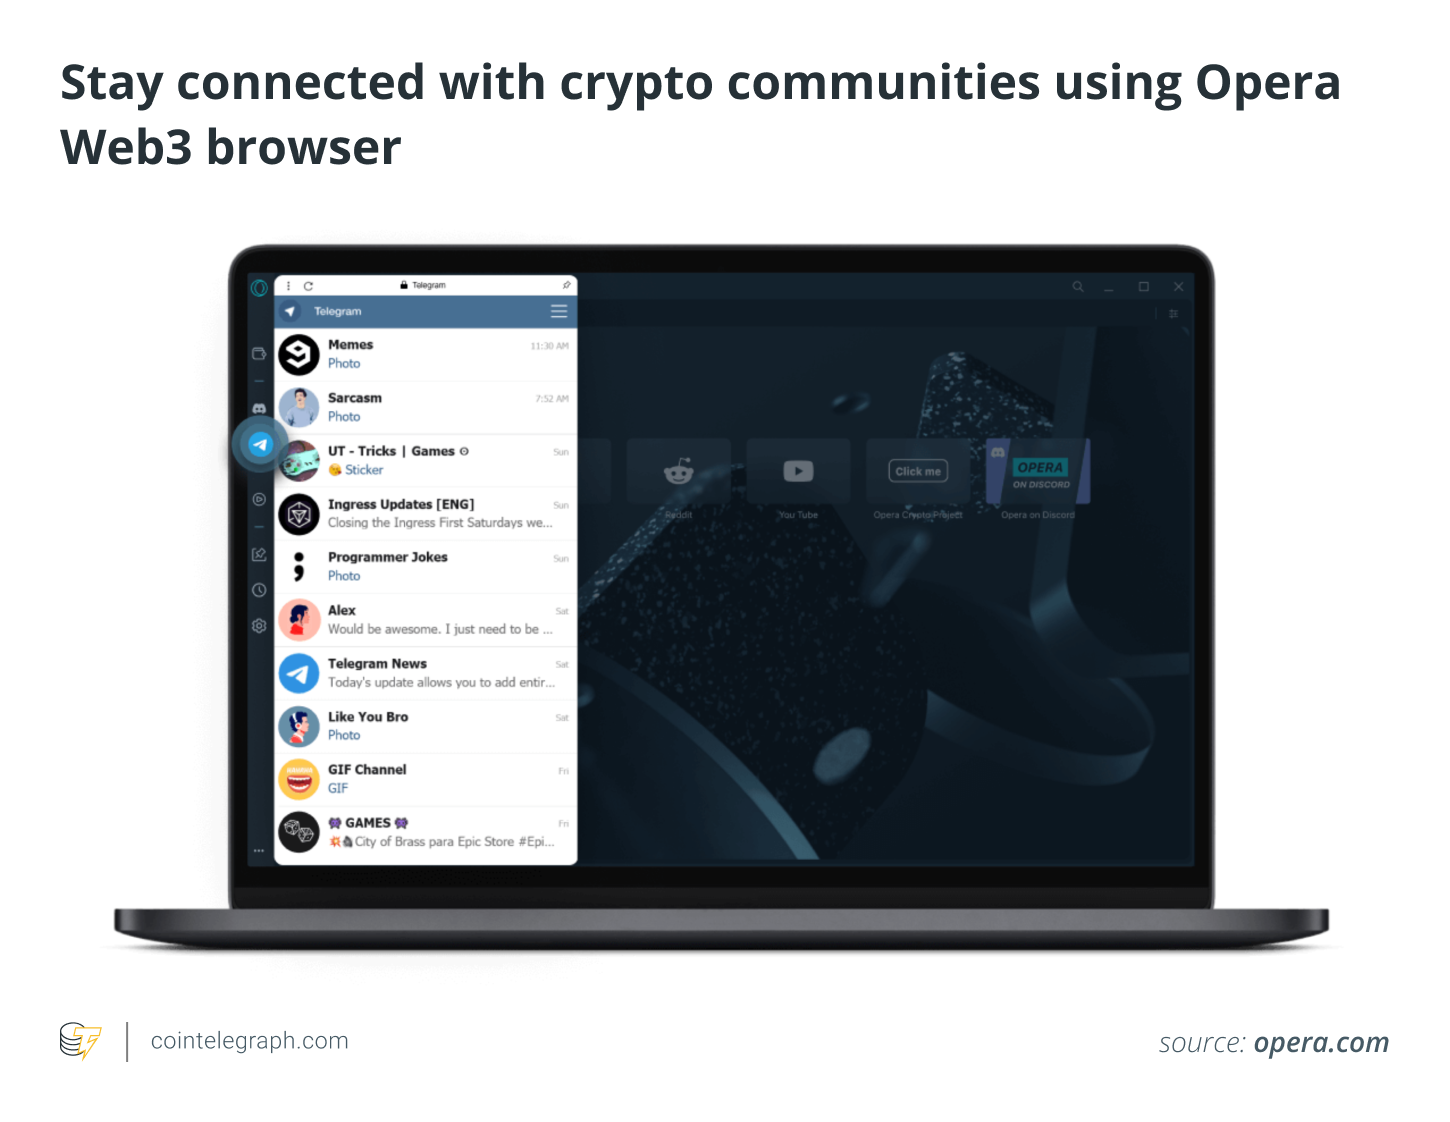 Stay connected with crypto communities using Opera Web3 browser